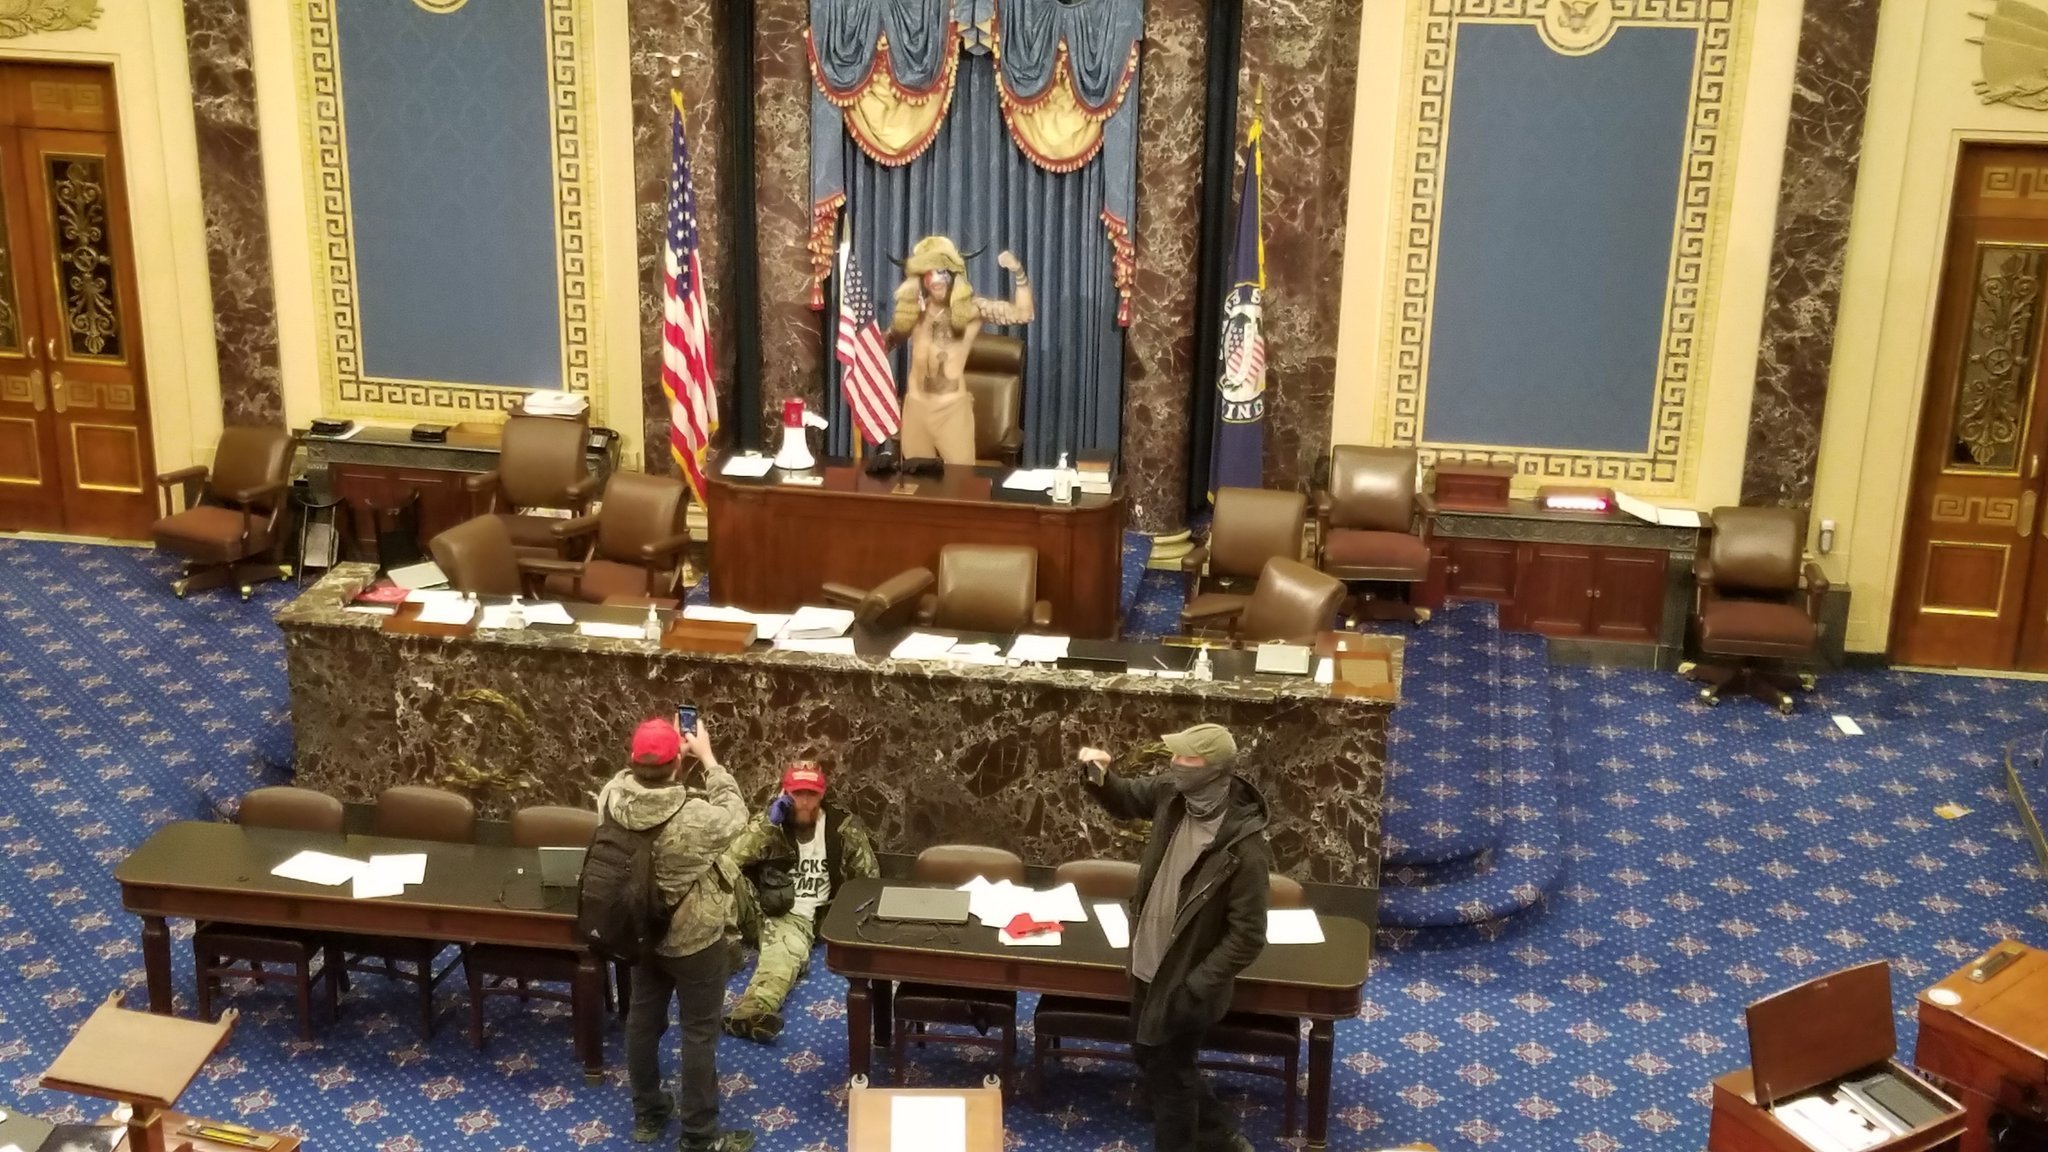 Featured image: File photo. Trump supporters took control of the Congress floor after storming the Capitol with police help. Q-anon